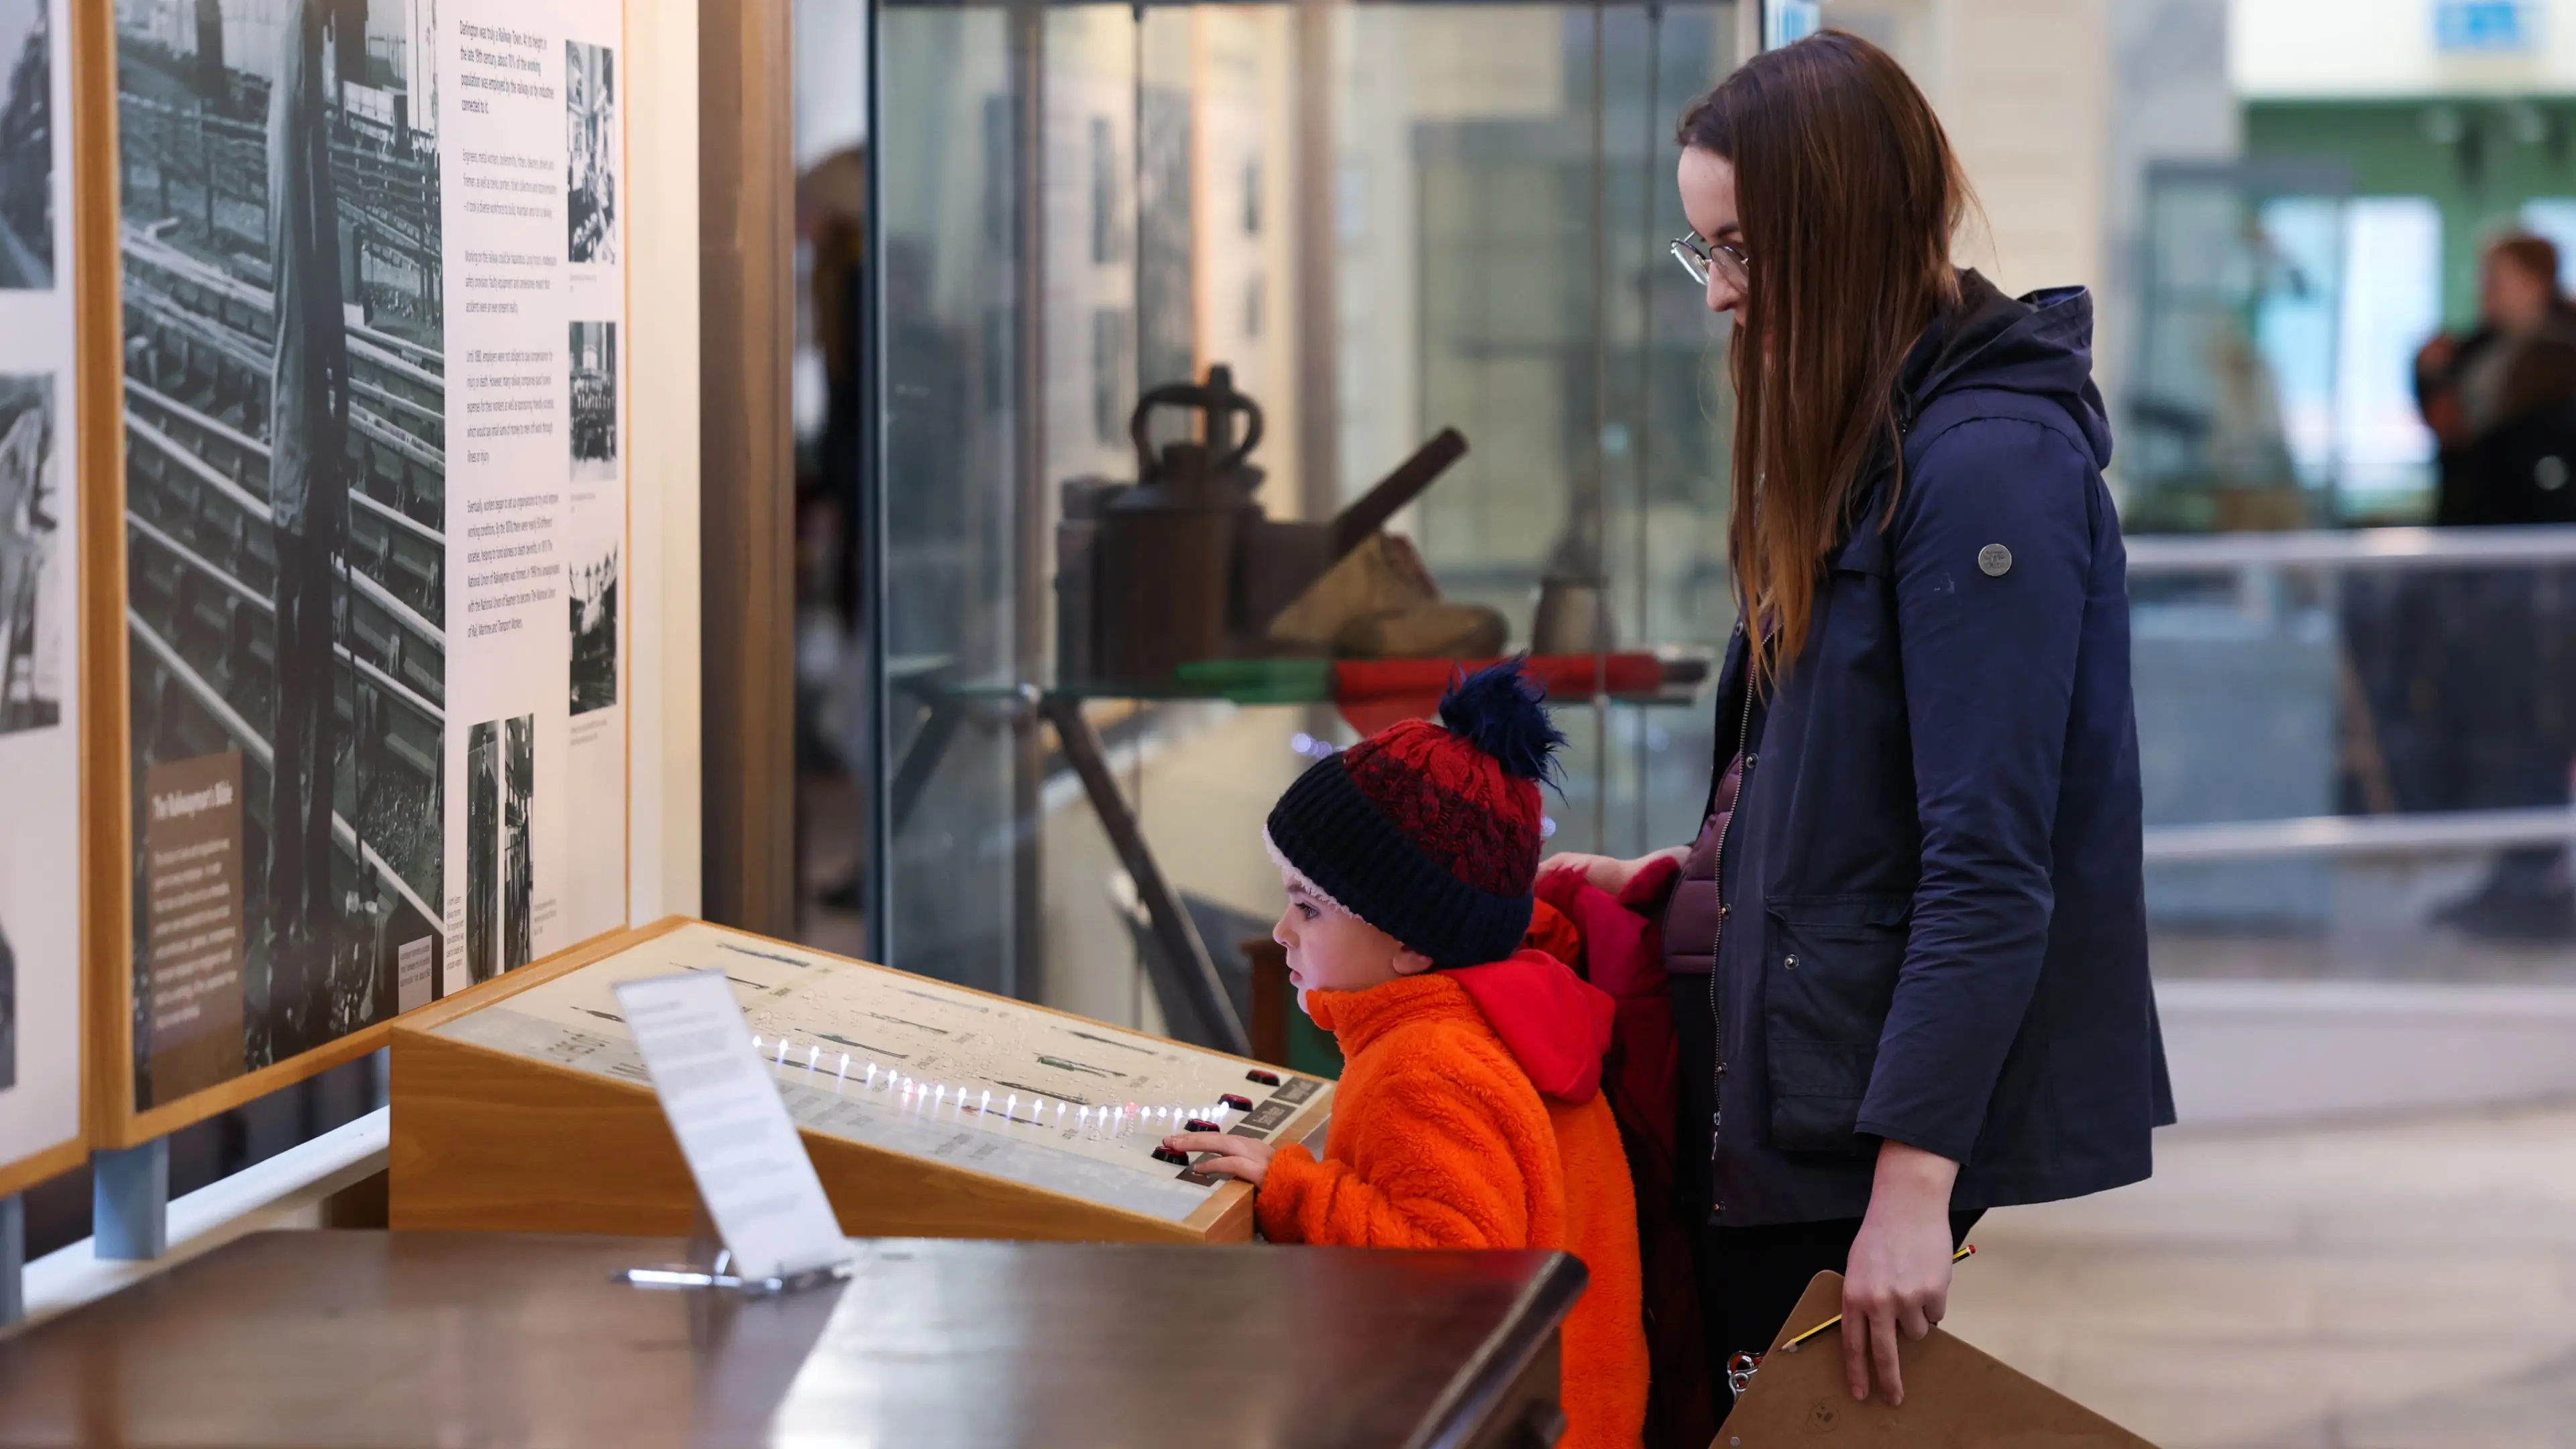 Mother and child interacting with museum display